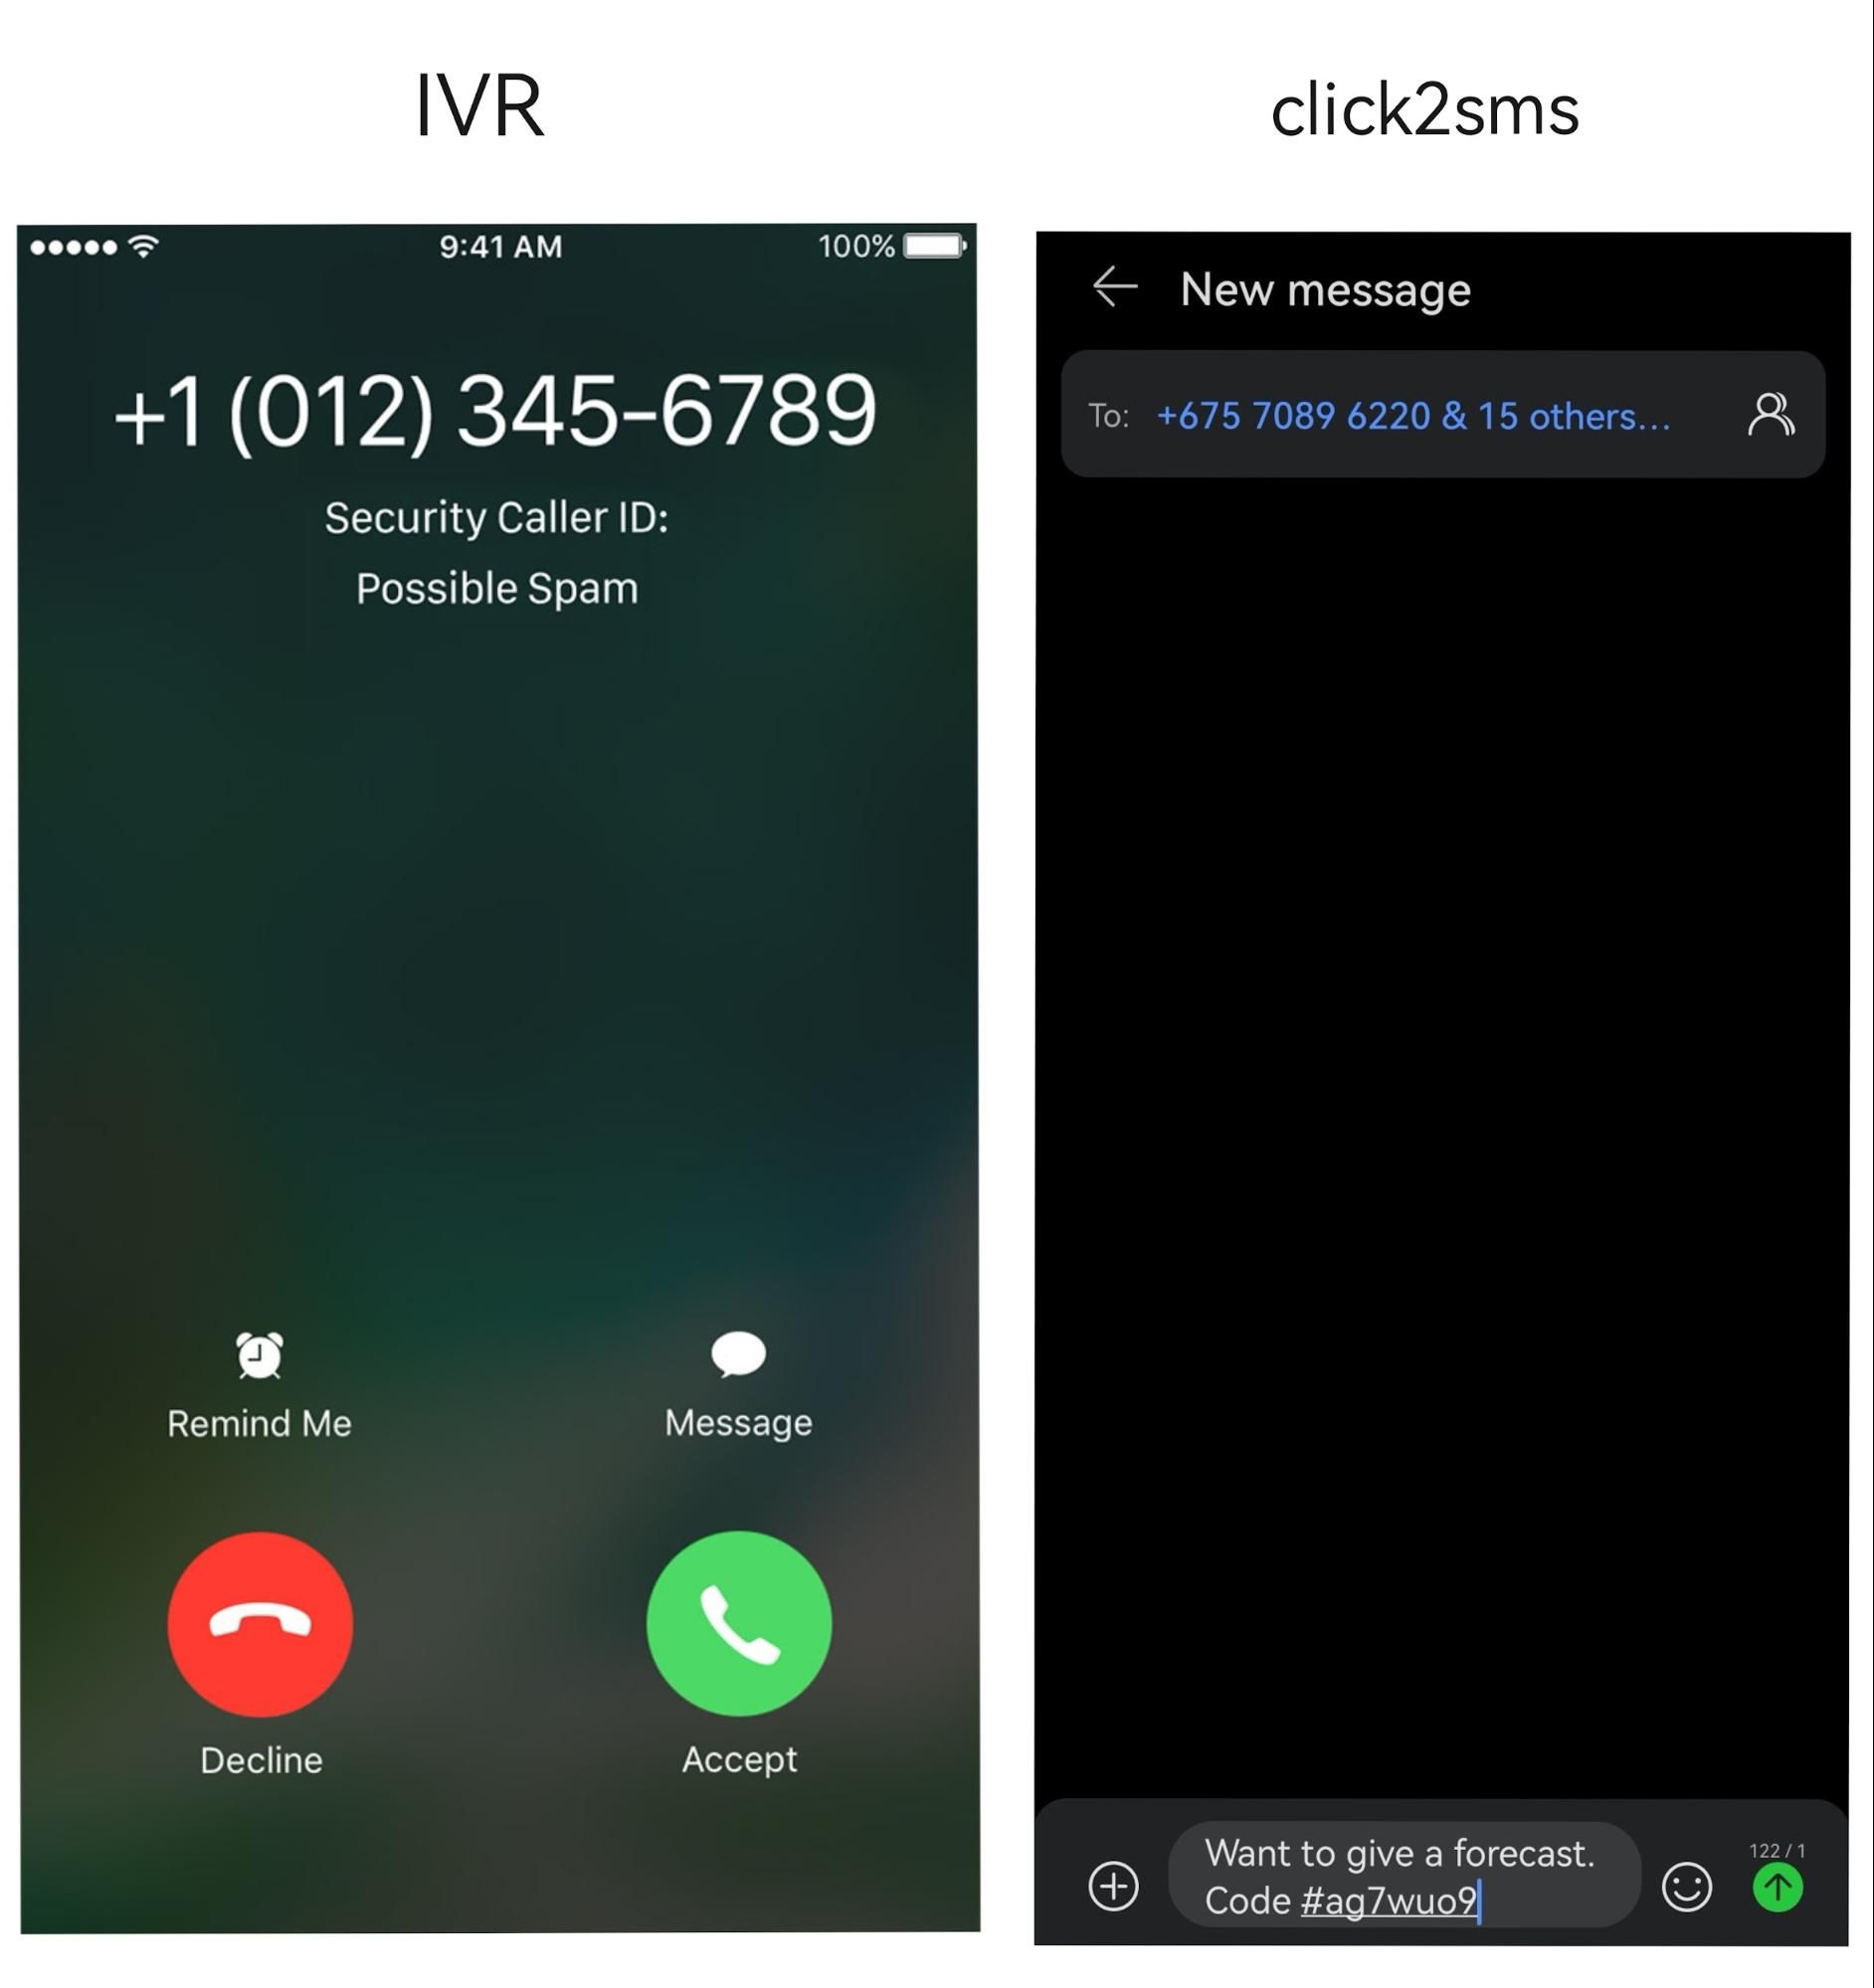 comparison of ivr and click2sms